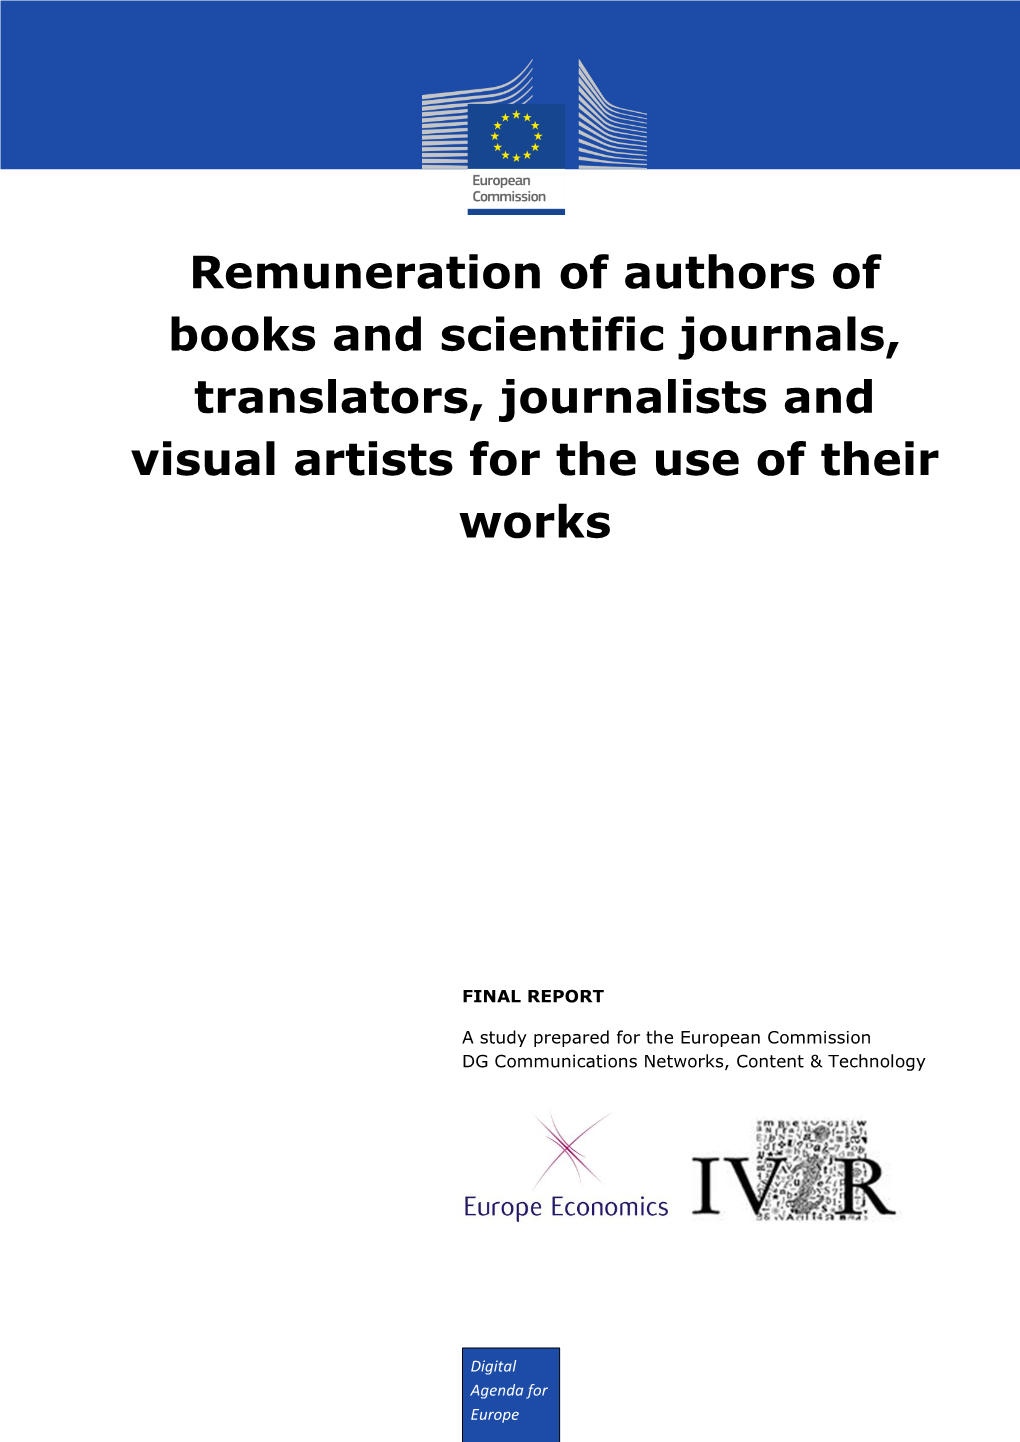 Remuneration of Authors of Books and Scientific Journals, Translators, Journalists and Visual Artists for the Use of Their Works